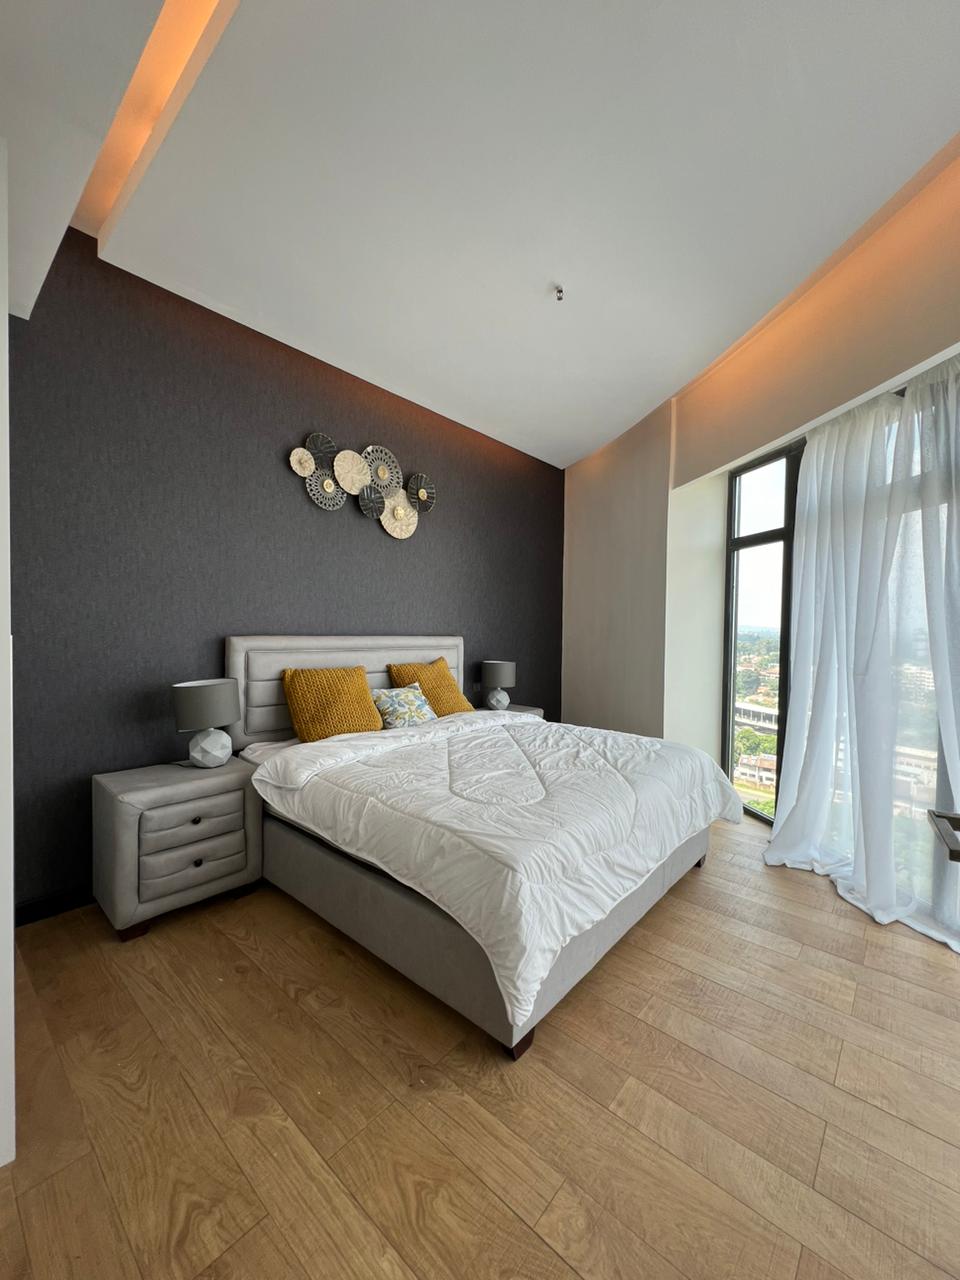 2 bedroom apartment to let in Westlands, Nairobi. Per month 300,000. Per day 15,000 Musilli Homes